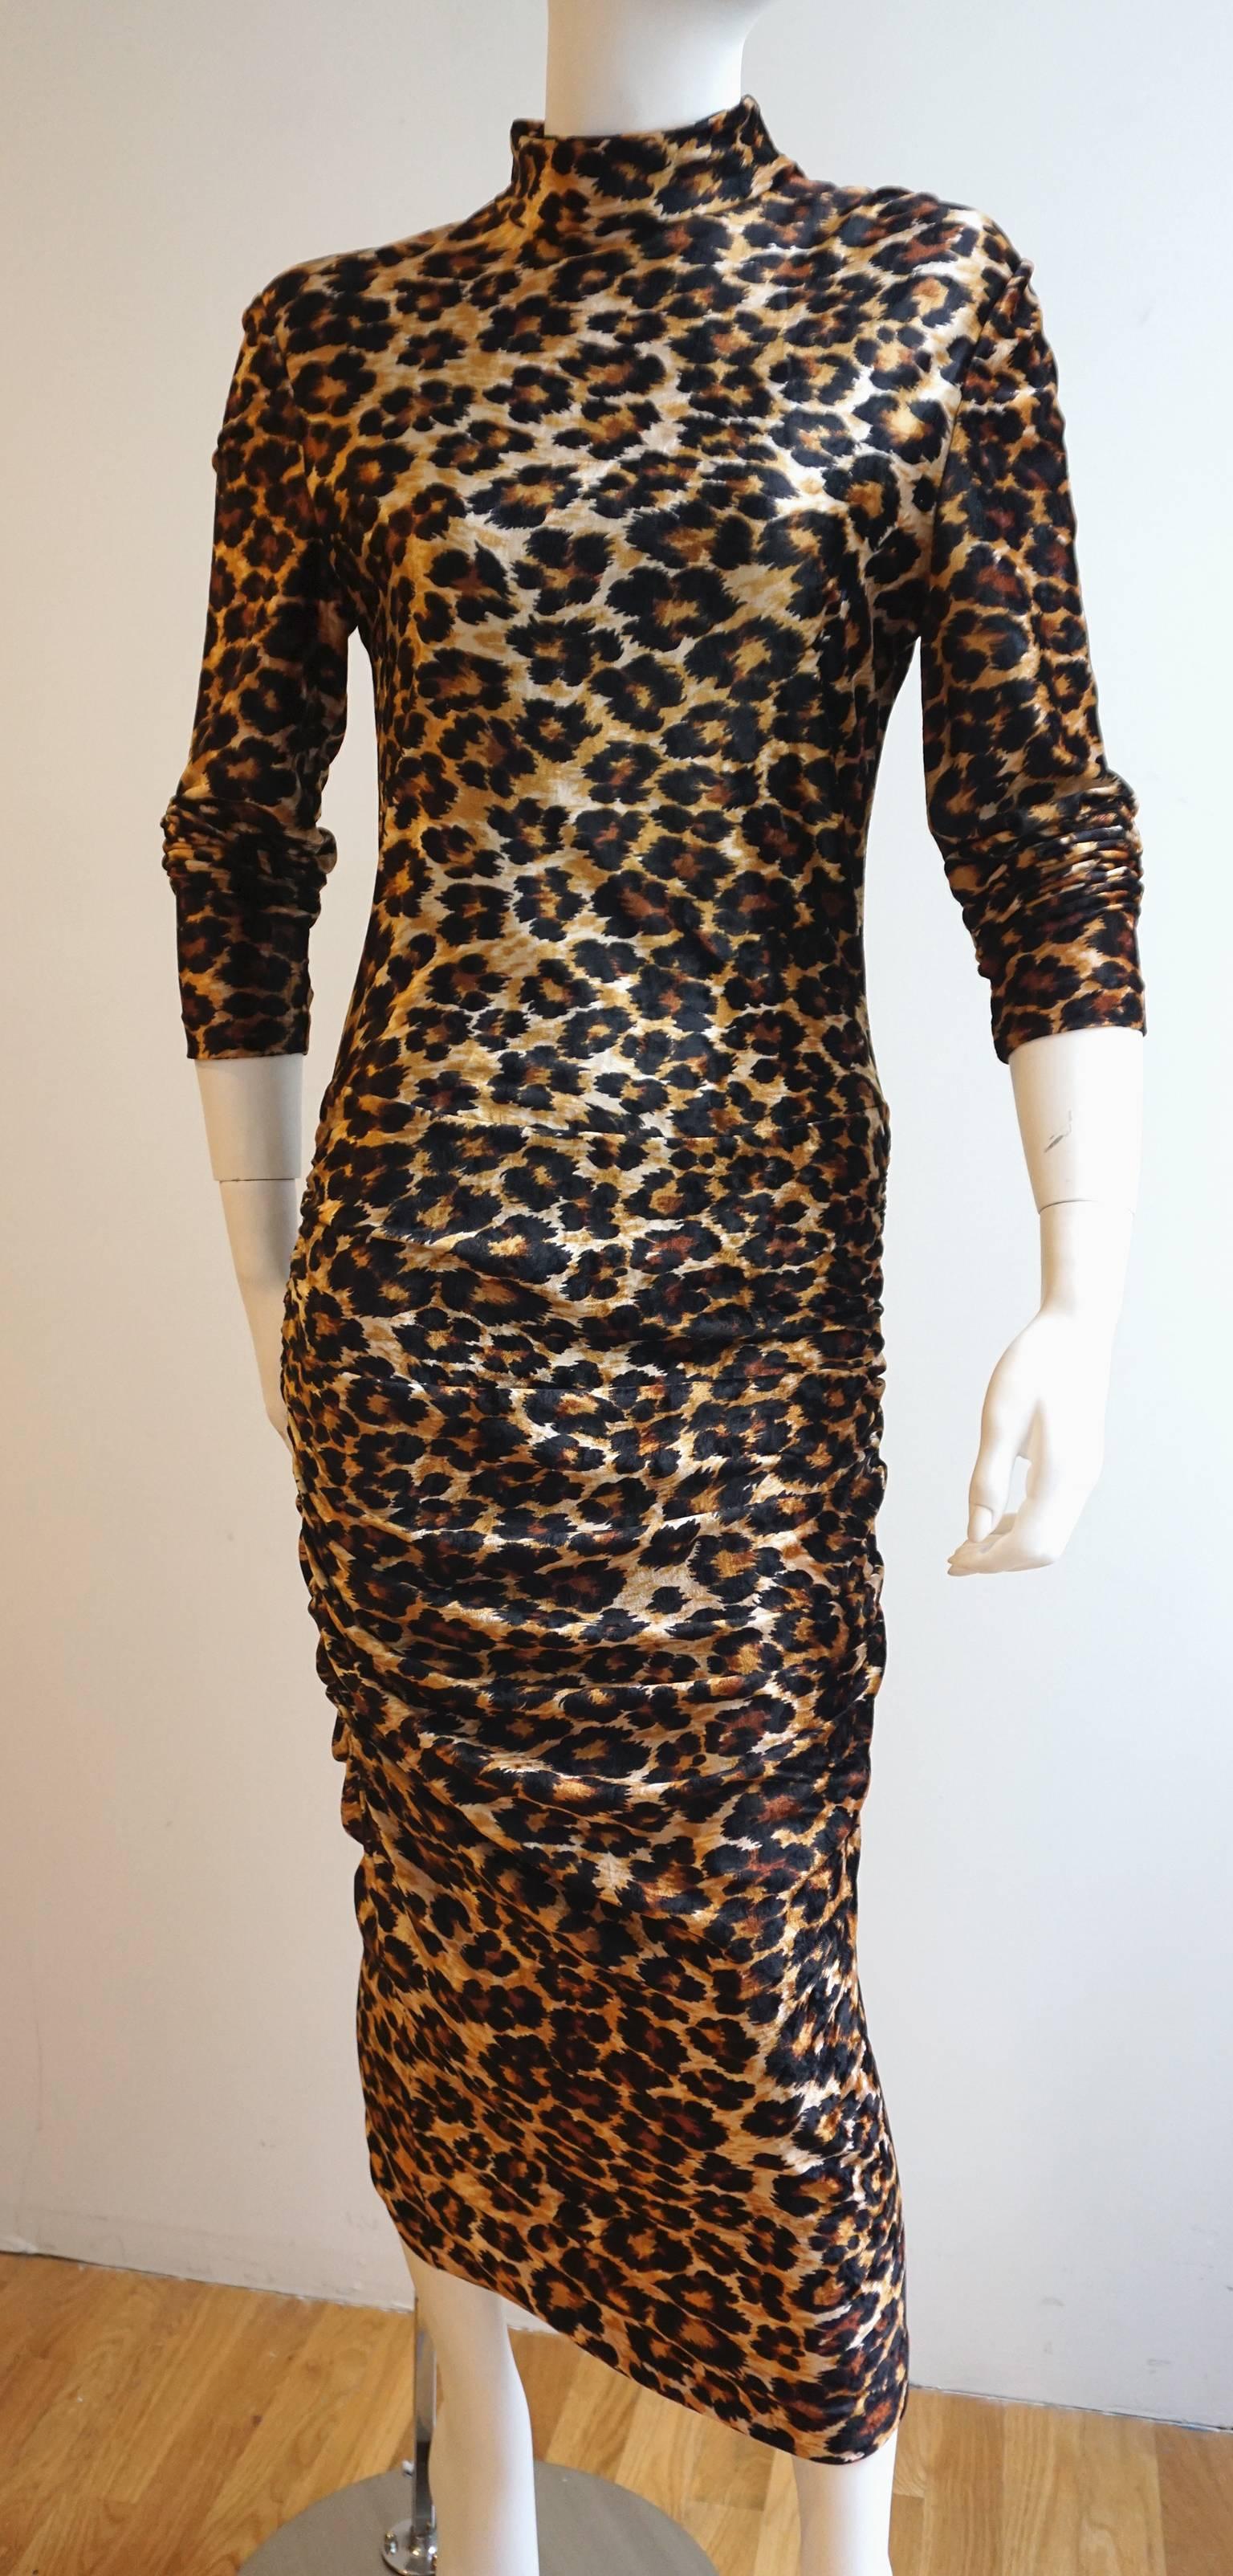 The soft, luxurious fabric features a bold and graphic leopard print. The fabric has a fair amount of stretch which accentuates the ruching along either side of the skirt. The mock neck and long sleeves cling to the body. There is a back zipper